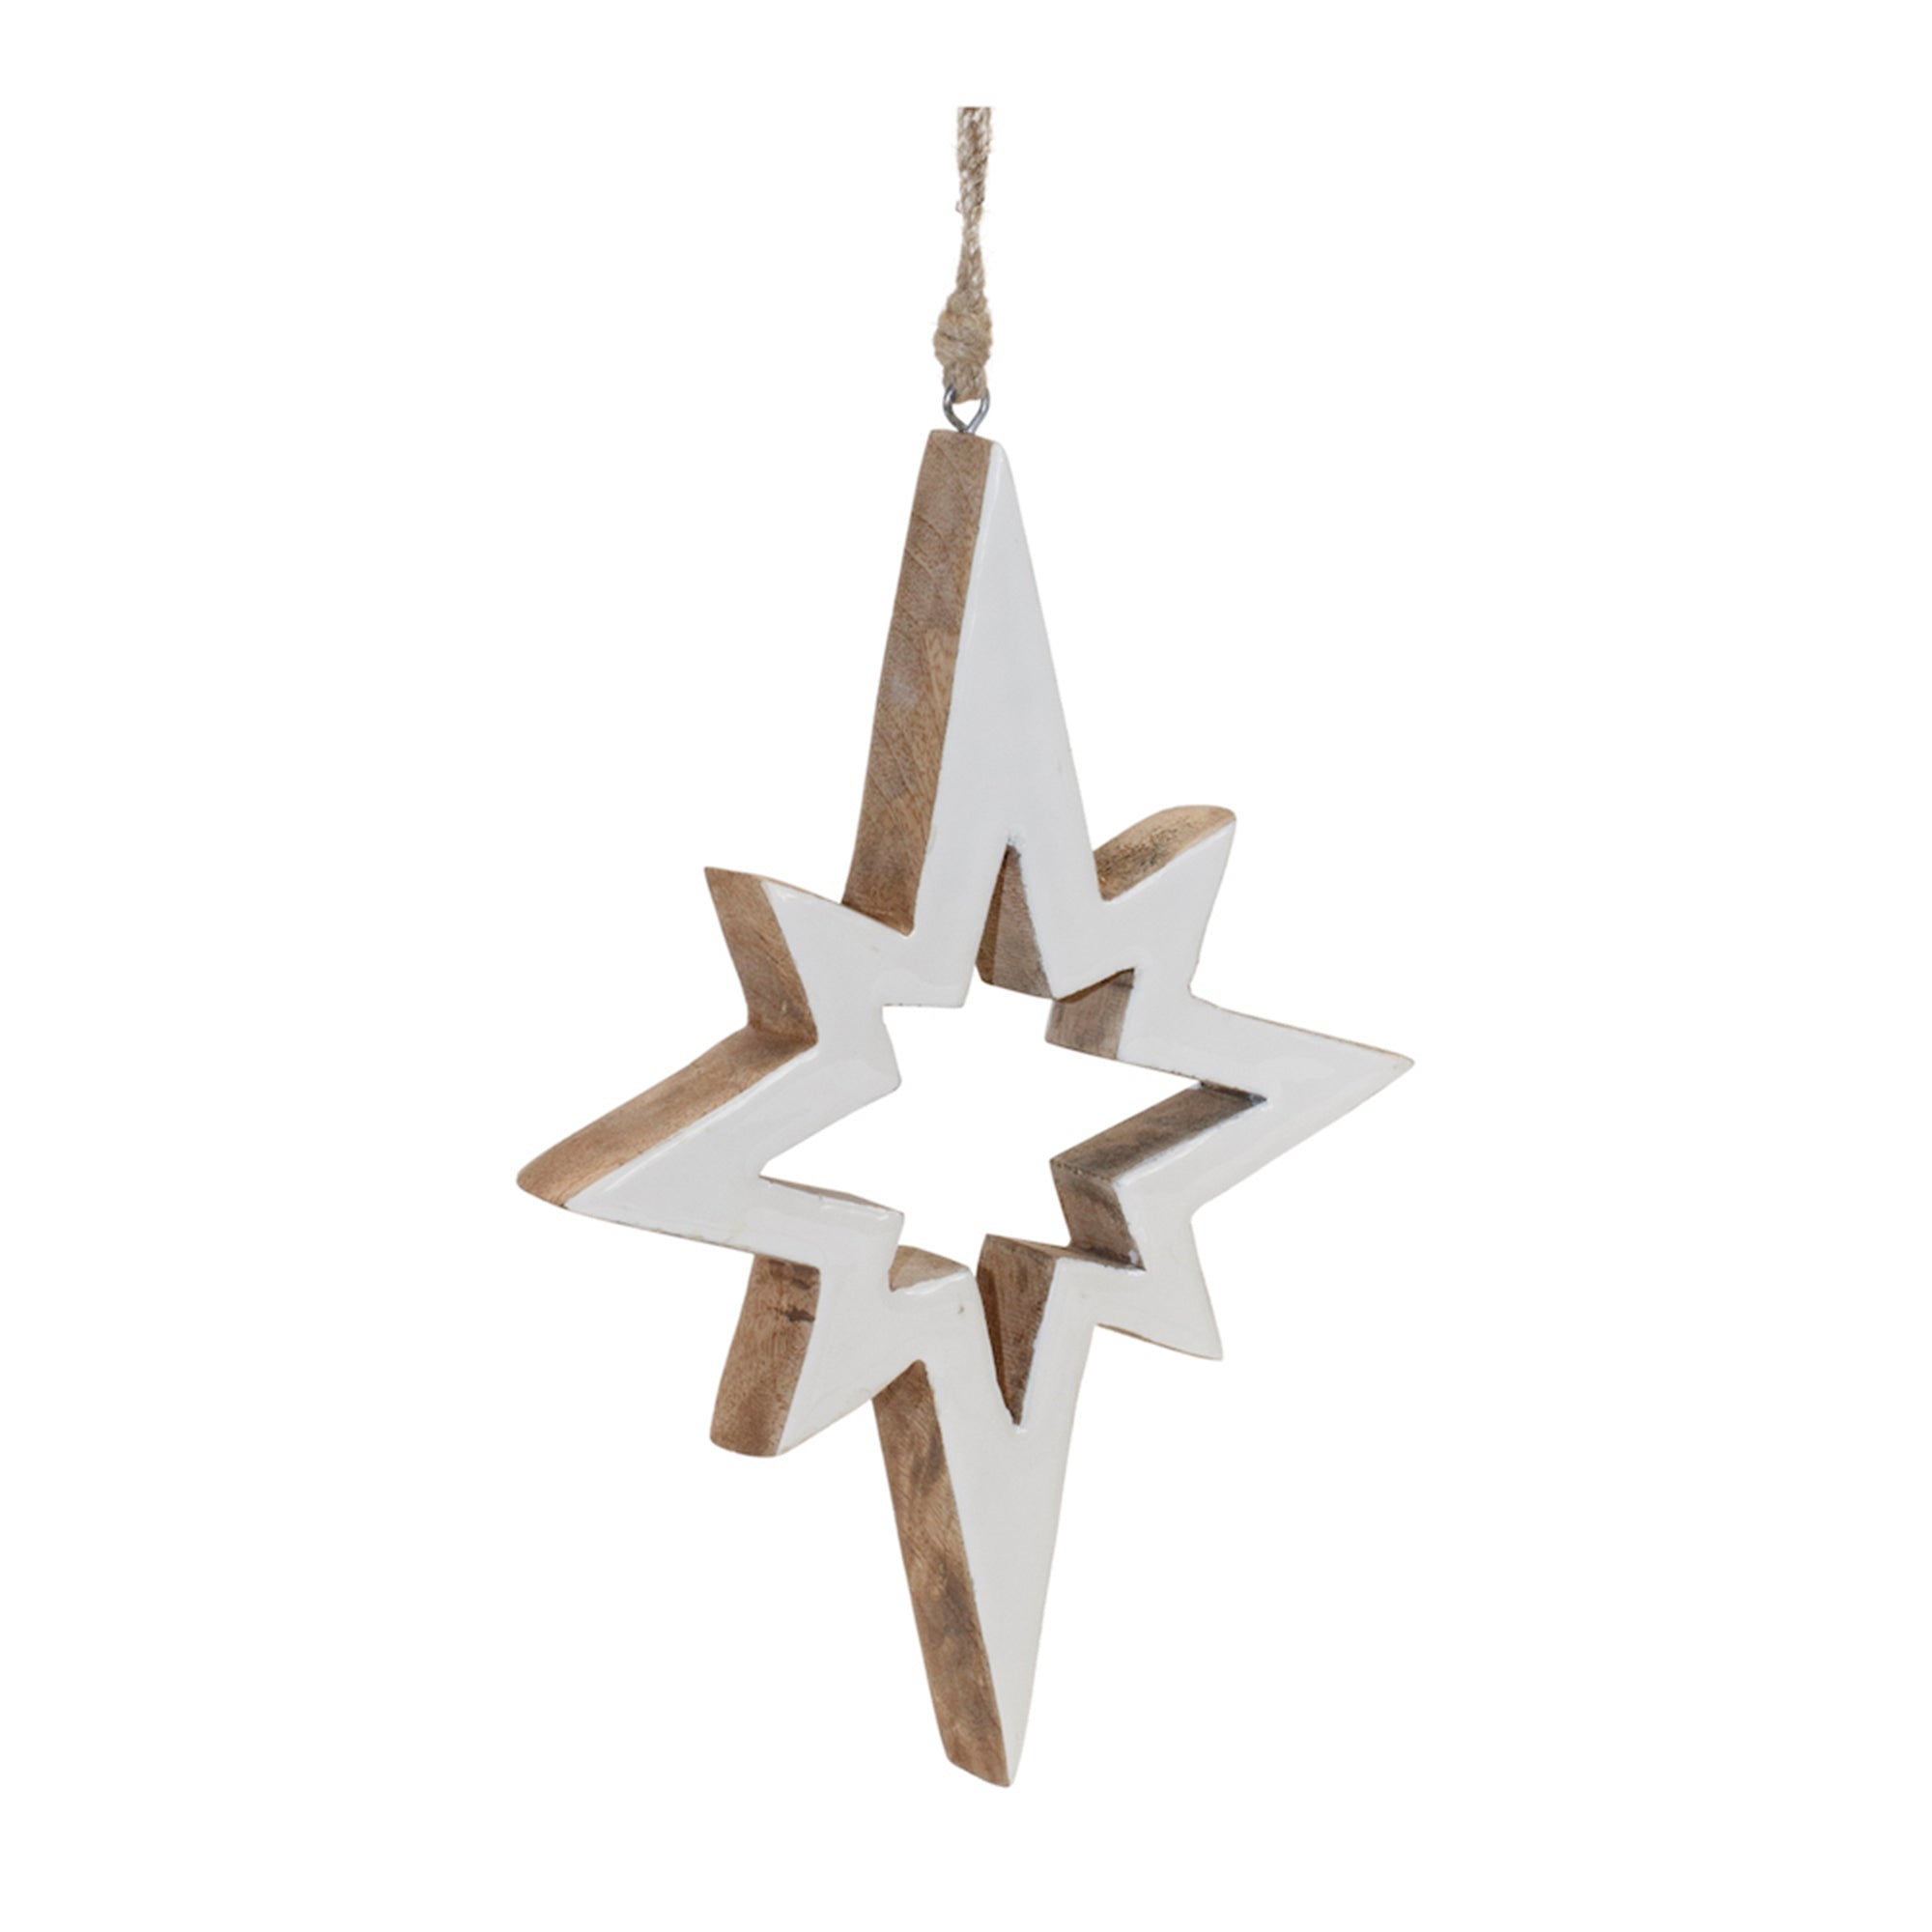 Wood Star Cut-Out Ornament (Set of 4)